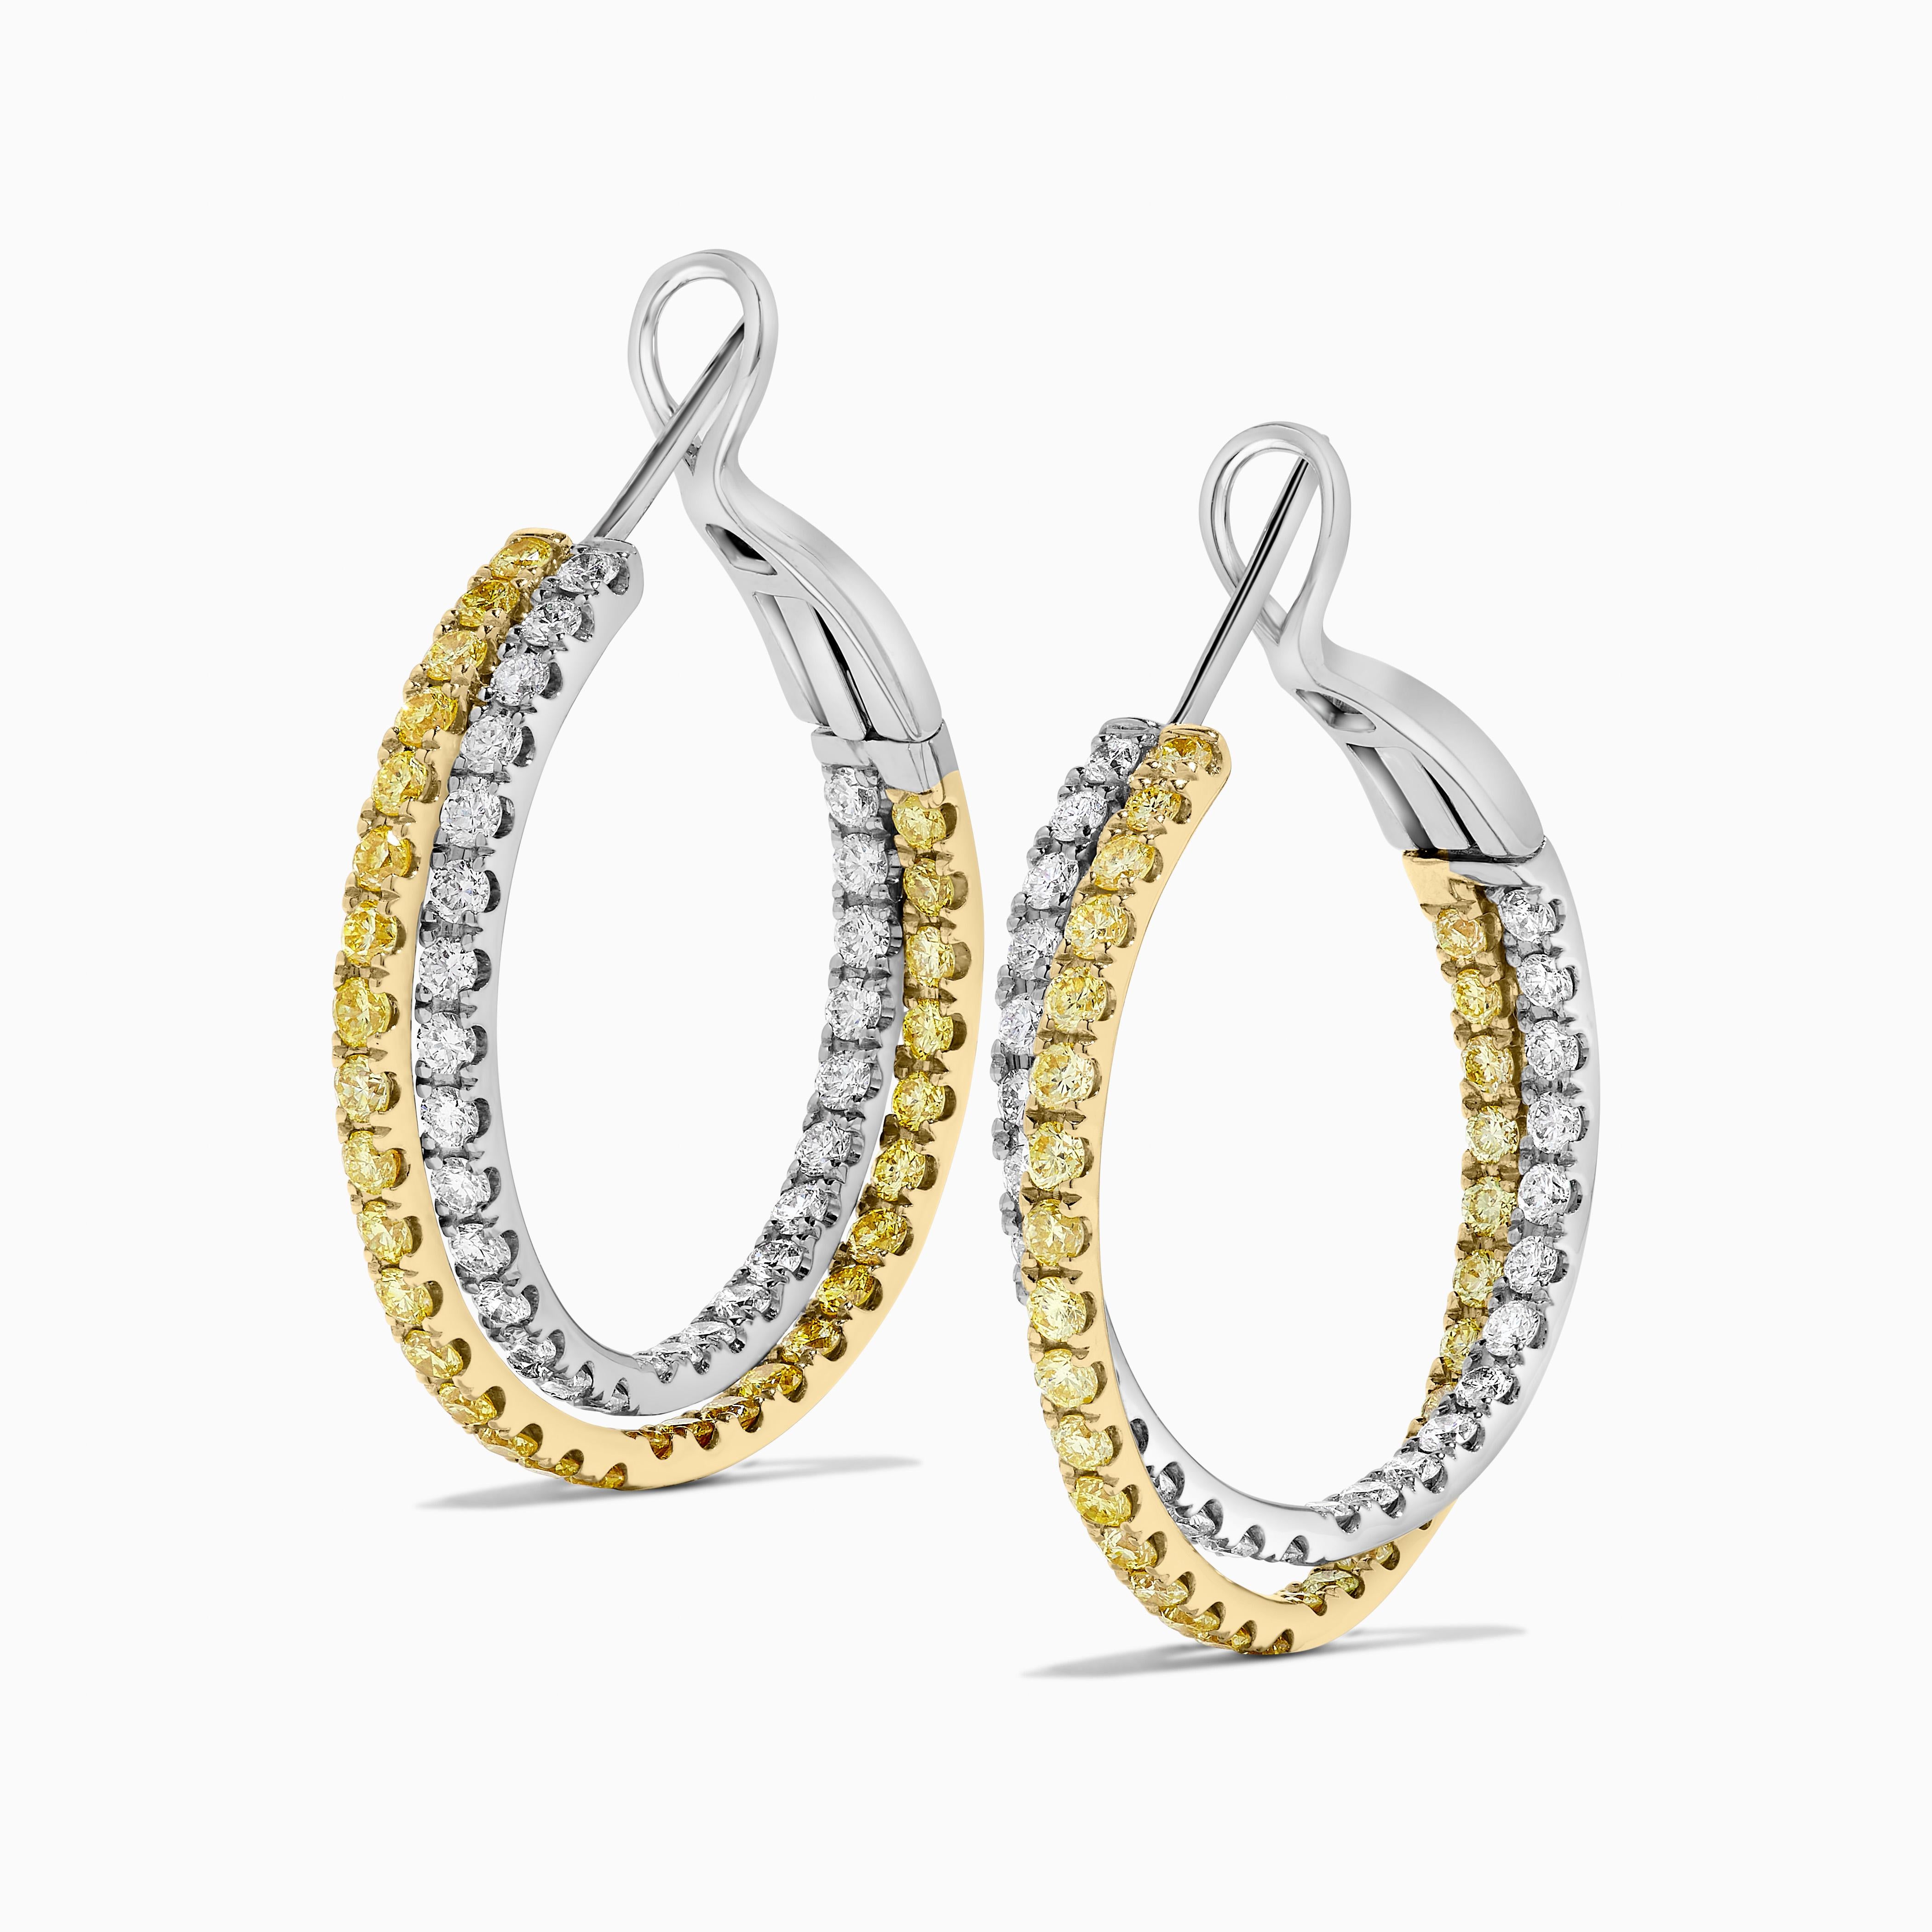 RareGemWorld's classic natural round cut diamond earrings. Mounted in a beautiful 18K Yellow and White Gold setting with natural round cut yellow diamonds. These earrings include both natural round yellow diamond melee and natural round white